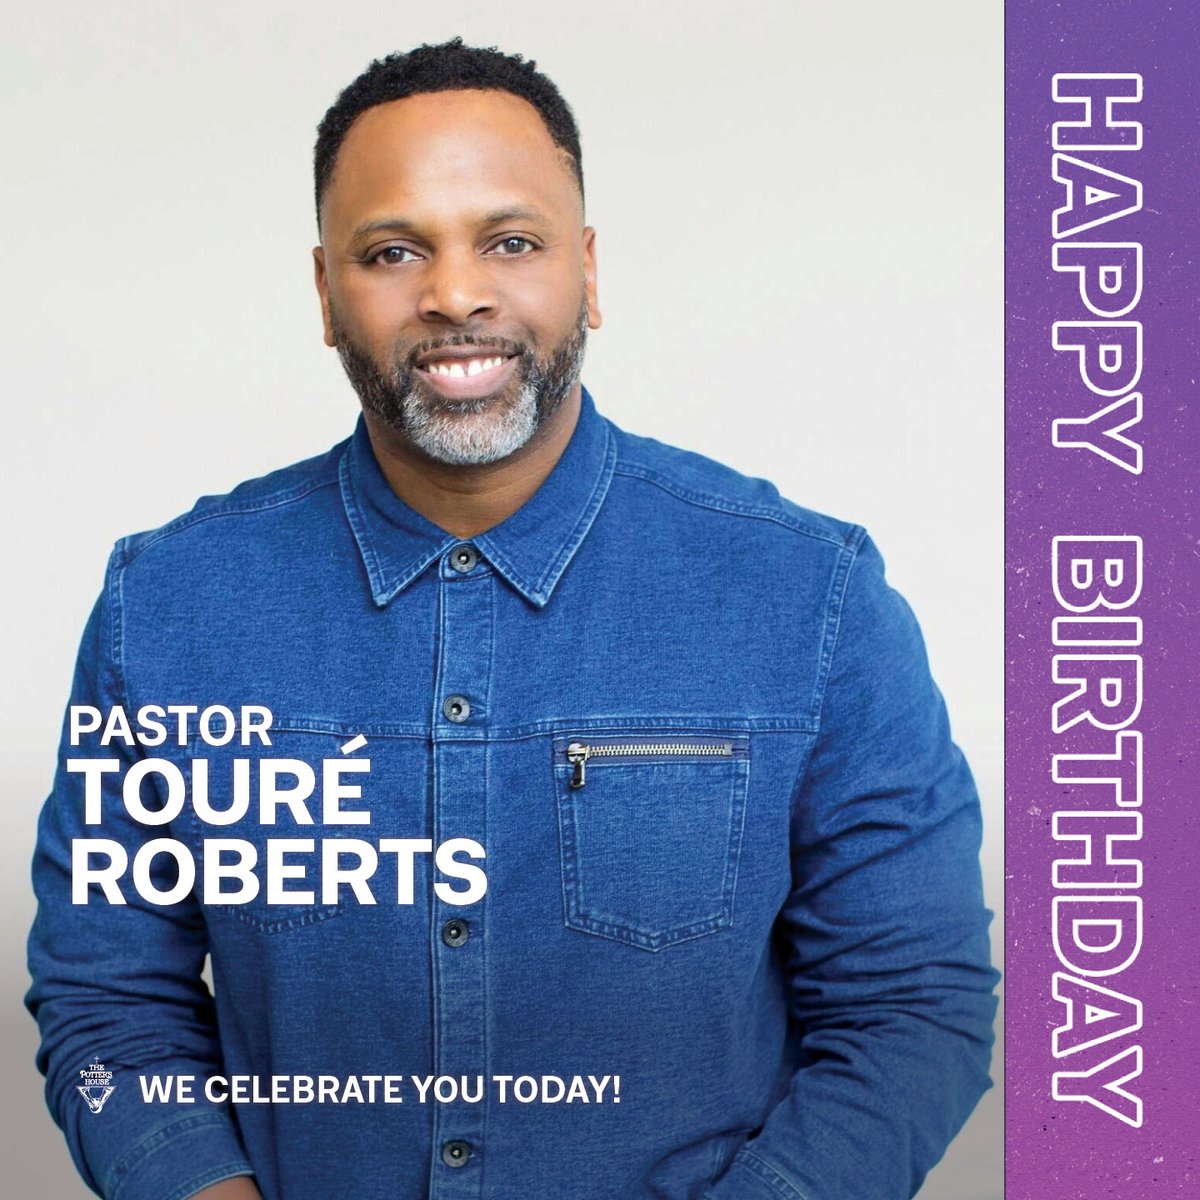 Happy birthday, Pastor @ToureRoberts! 🎉 May God bless you and grant you long life, prosperity, and joy for all your days! We love you dearly and hope you enjoy your special day!